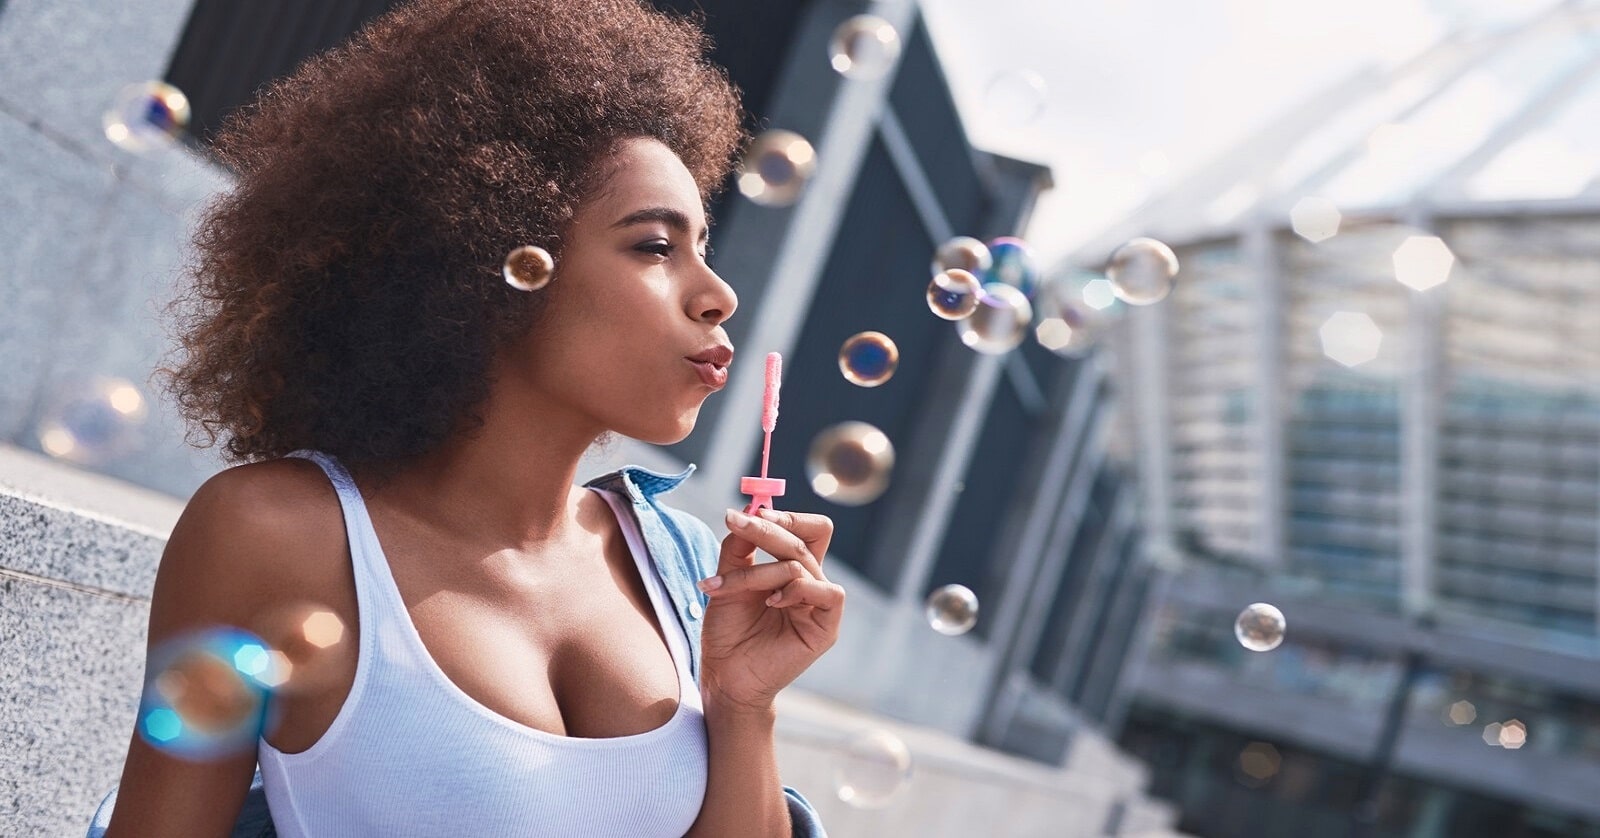 woman blowing bubbles on street to illustrate letting go of things